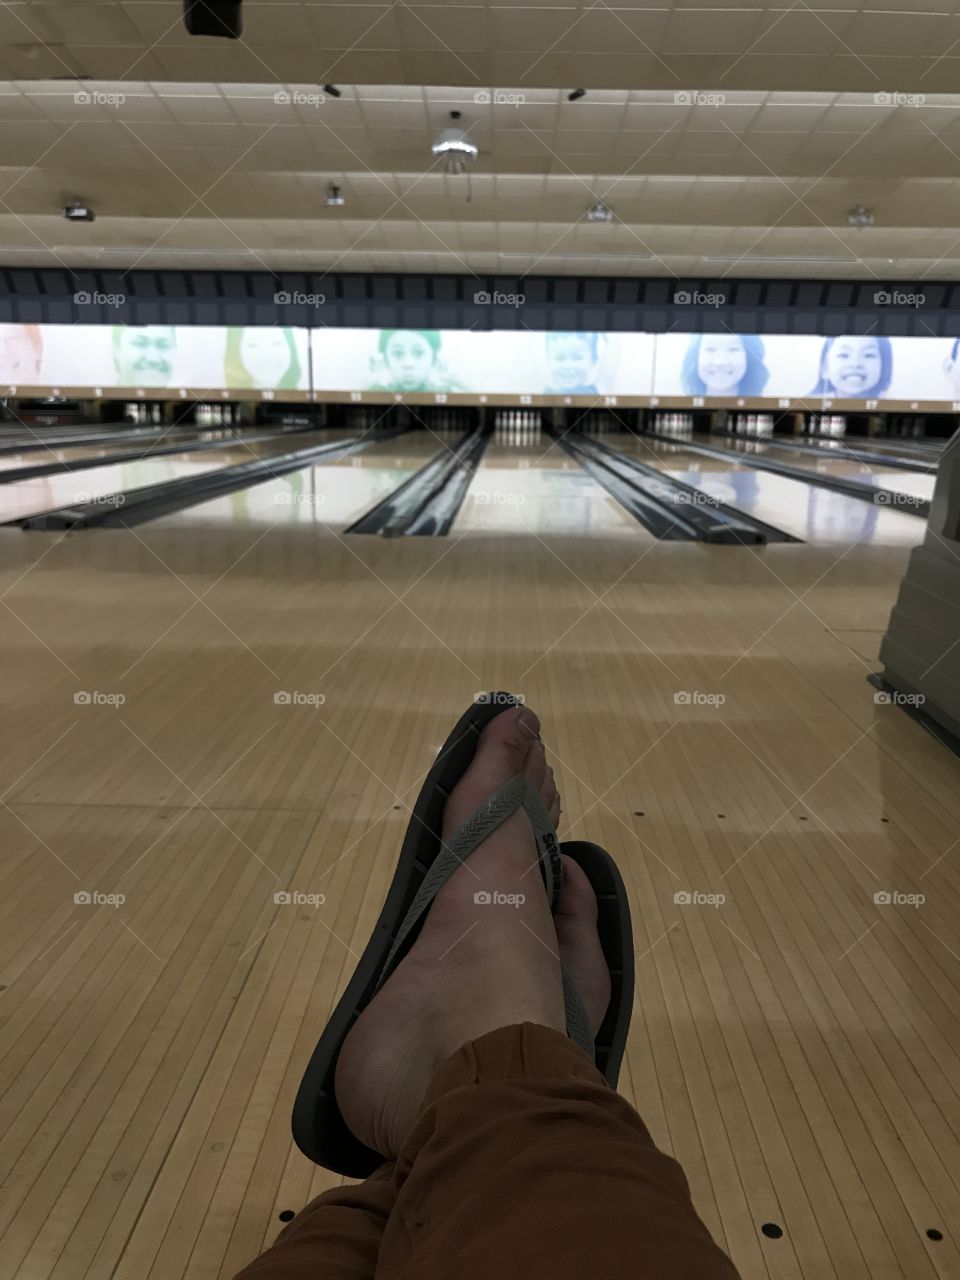 Good for bowling 